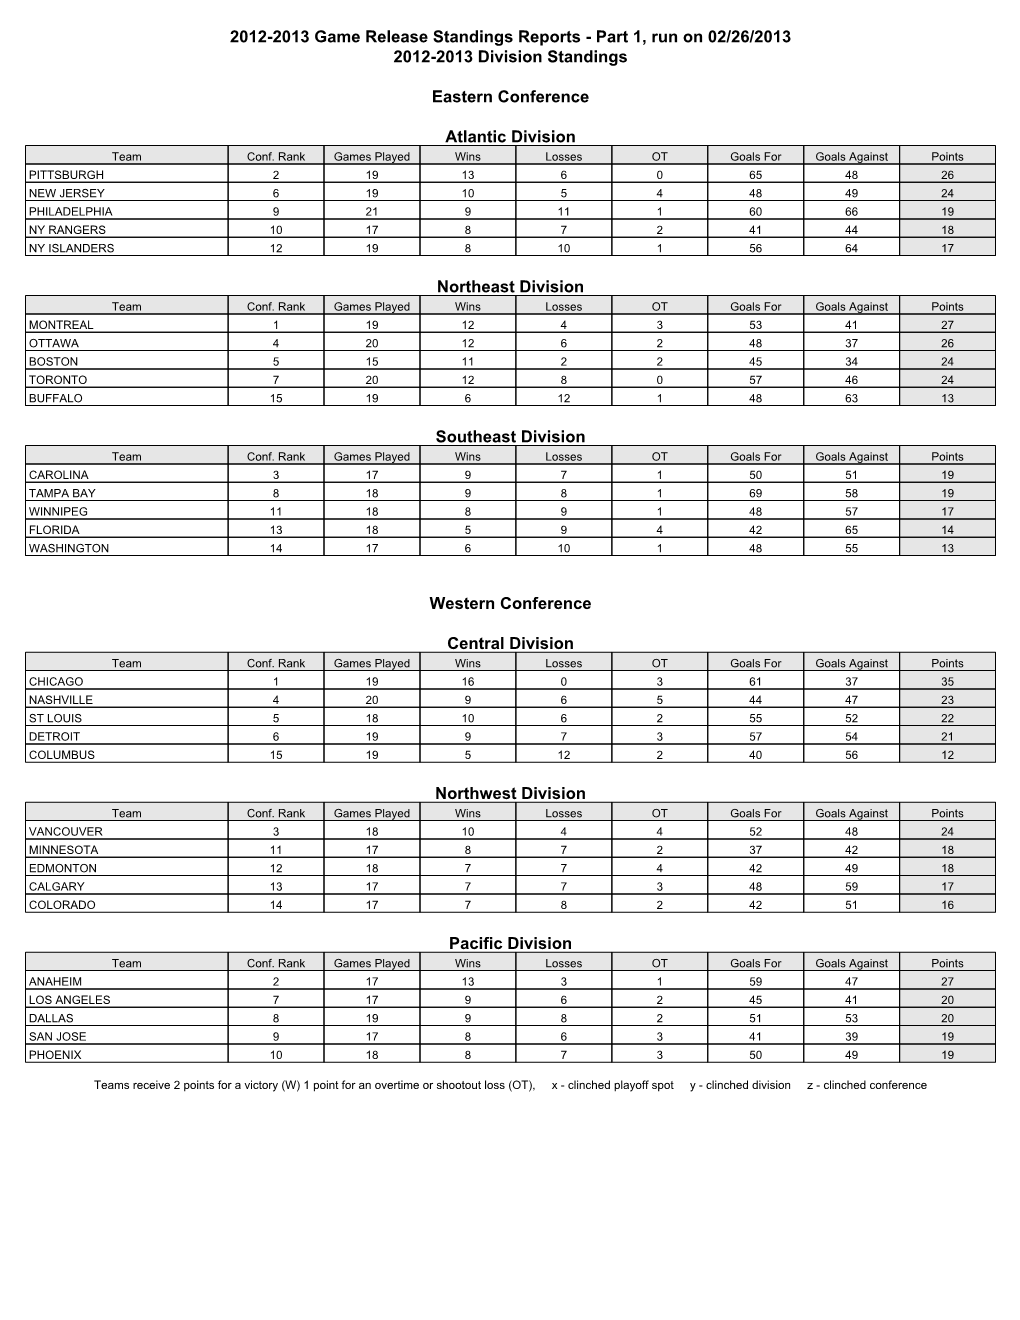 2012-2013 Game Release Standings Reports - Part 1, Run on 02/26/2013 2012-2013 Division Standings